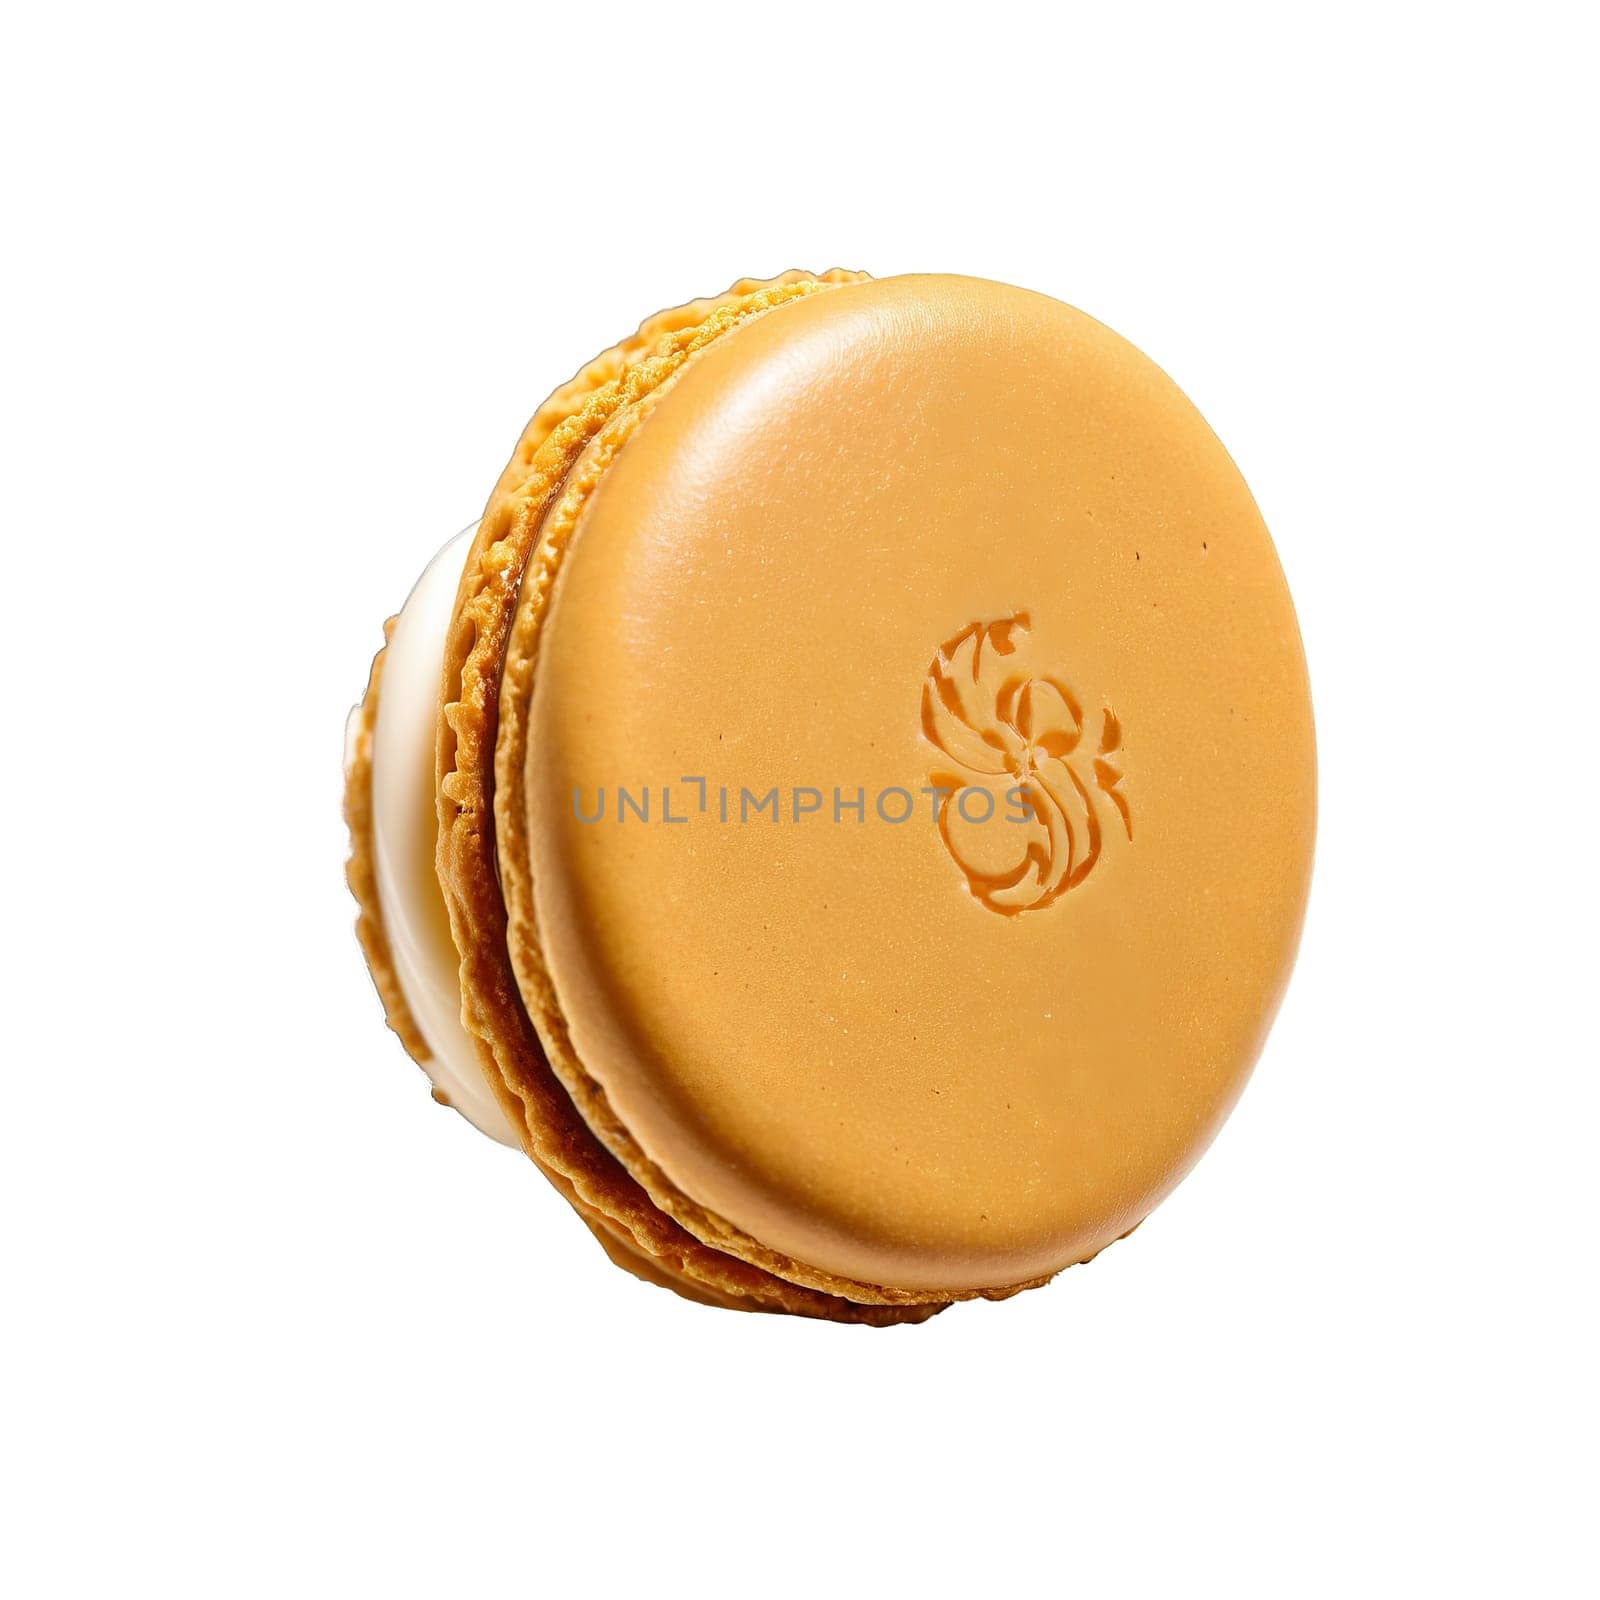 Pumpkin spice latte macaron with smooth shell pumpkin spice filling latte art decoration round shape by panophotograph